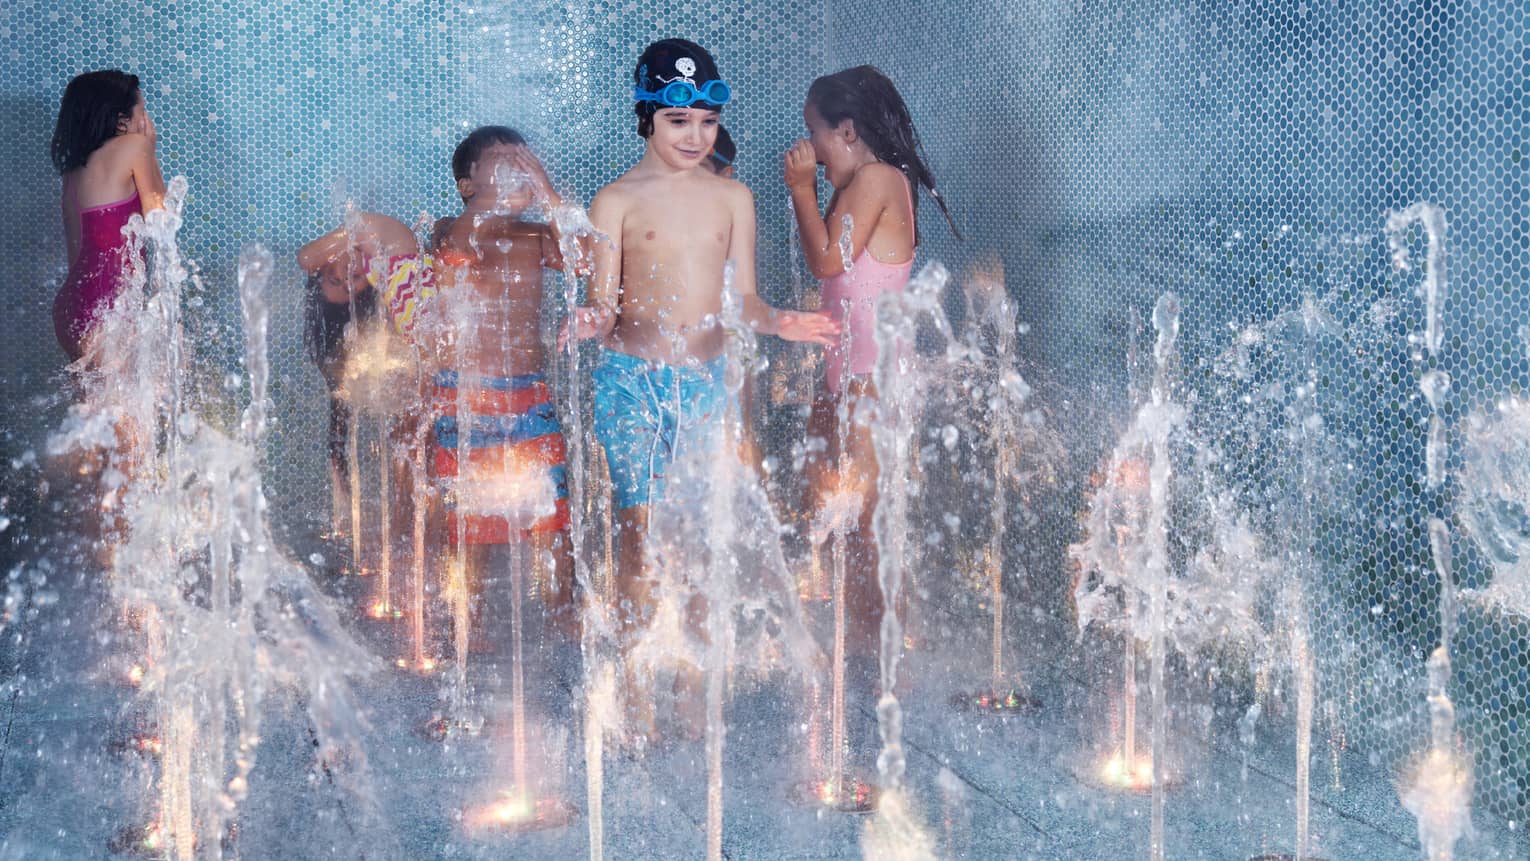 Six children play in a blue-tiled splash pad as water rises up from different holes in the floor